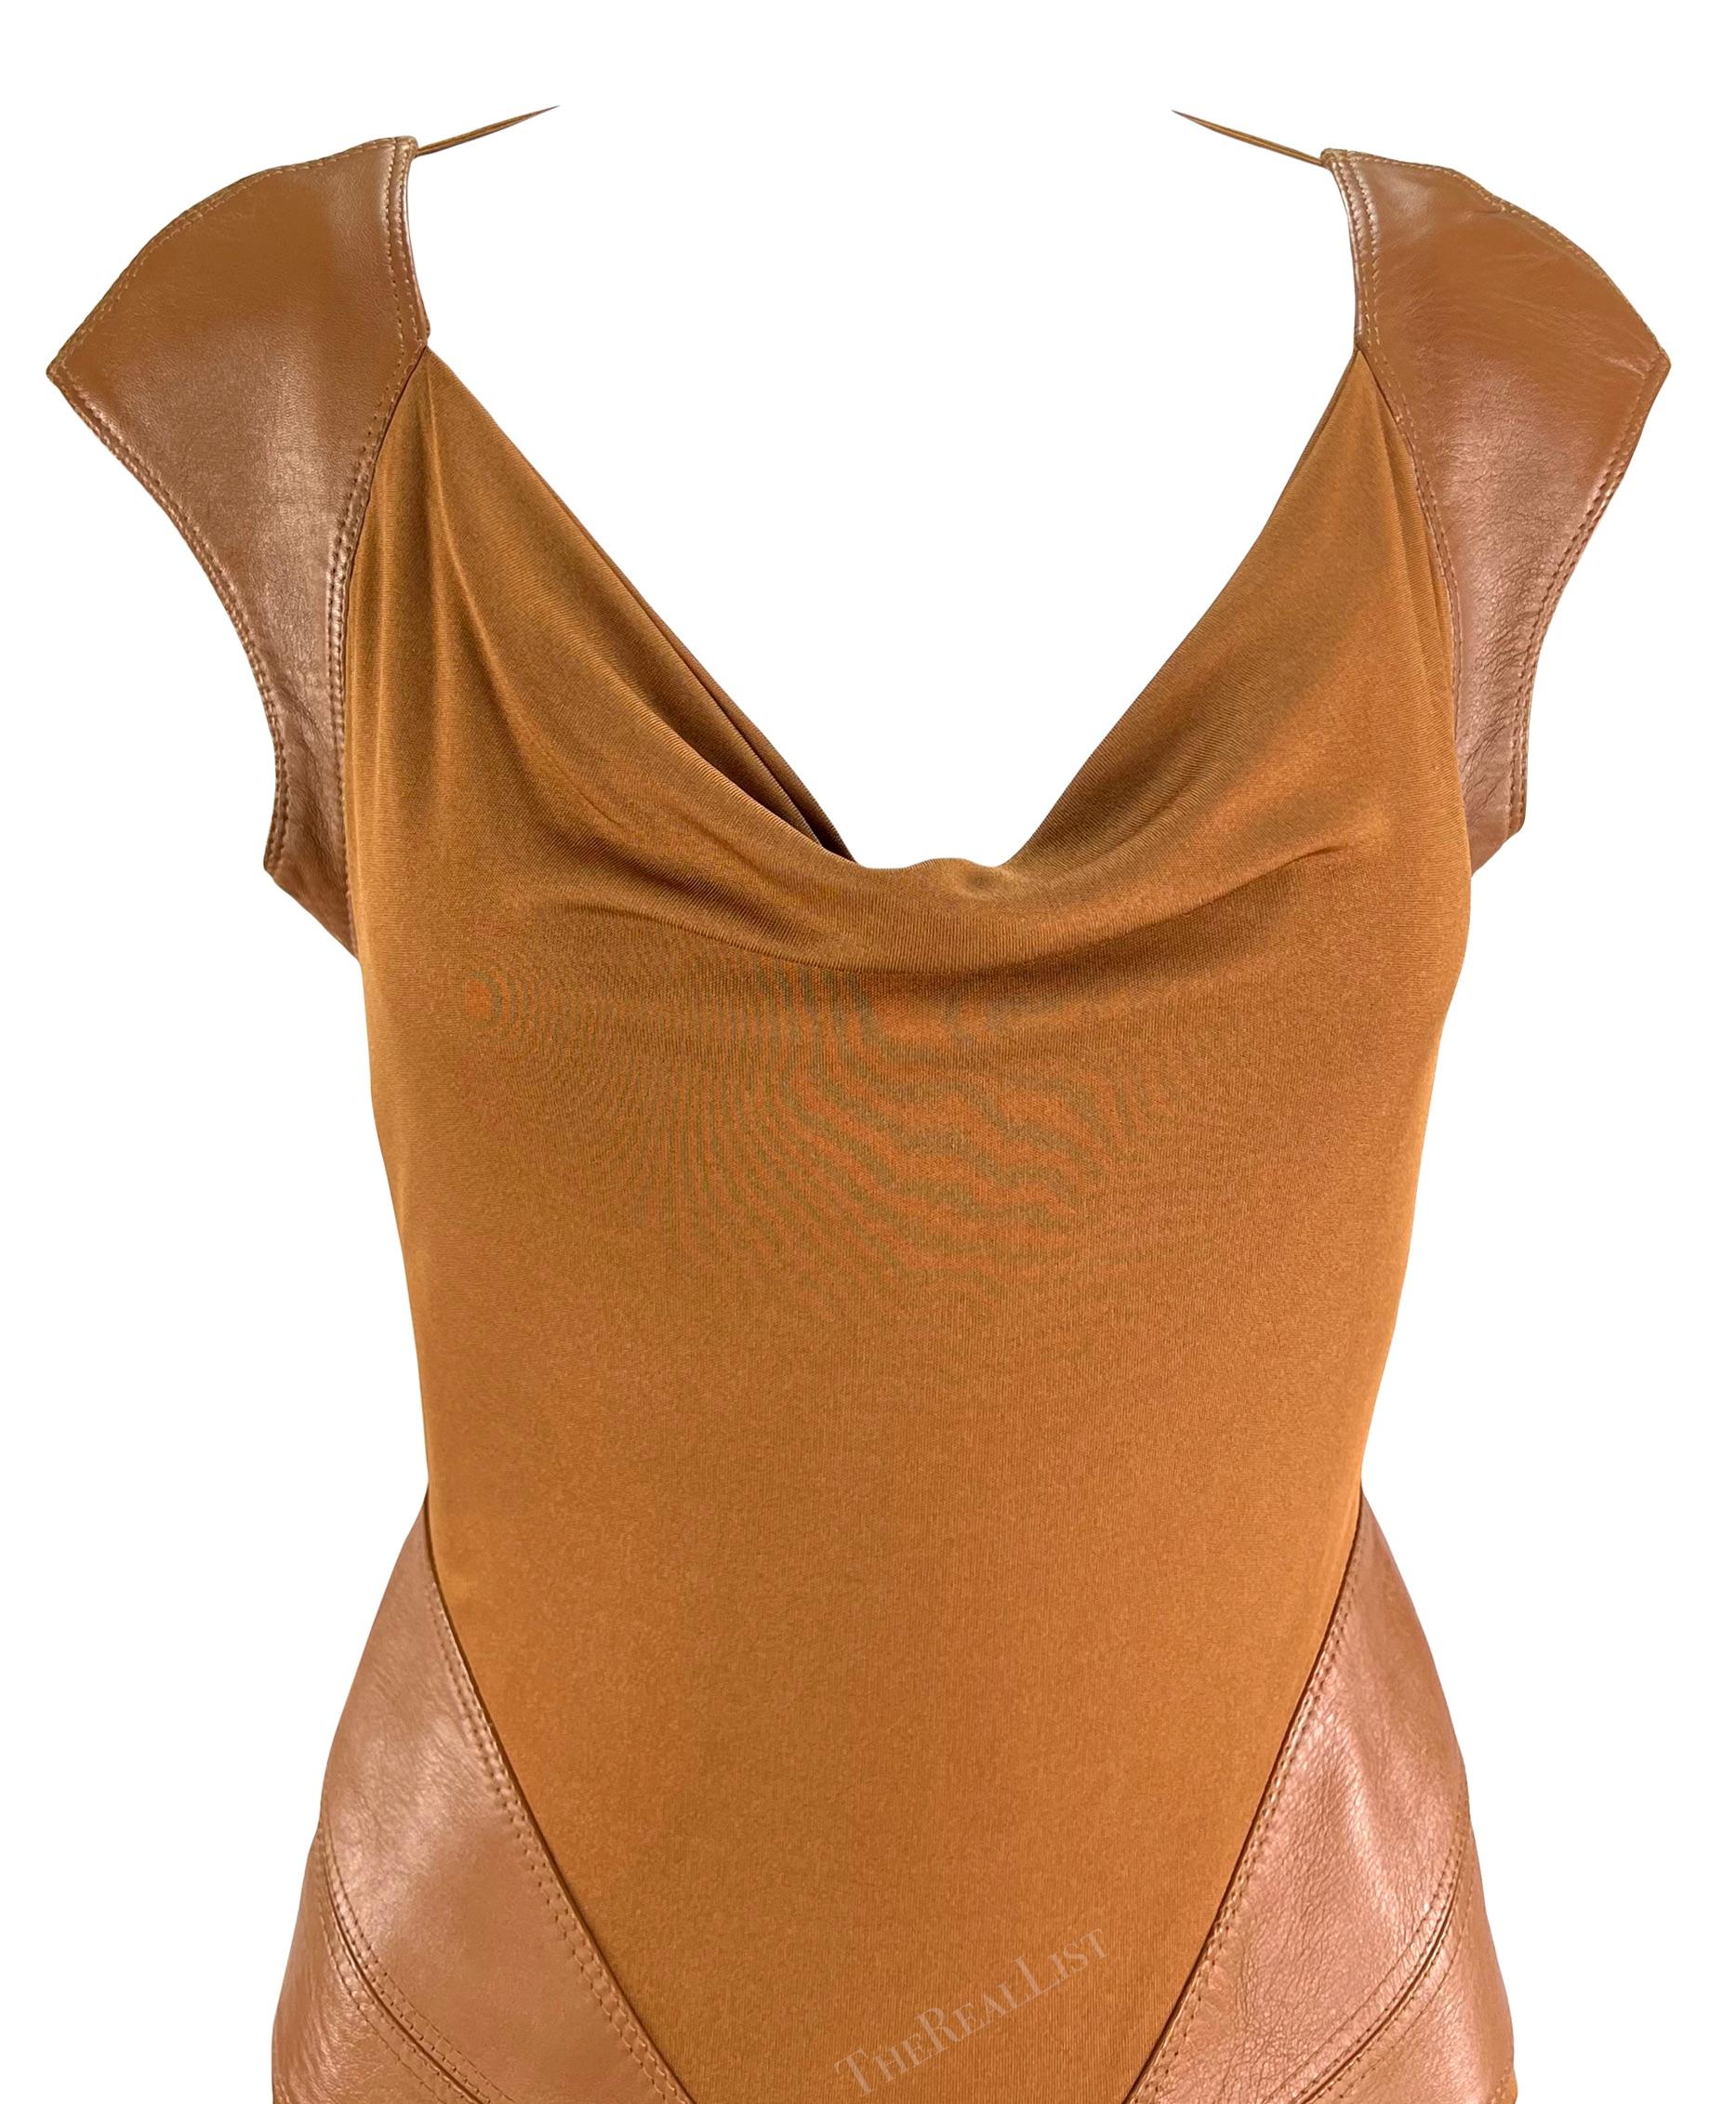 F/W 2001 Gianni Versace by Donatella Runway Saddle Brown Leather Backless Gown For Sale 3